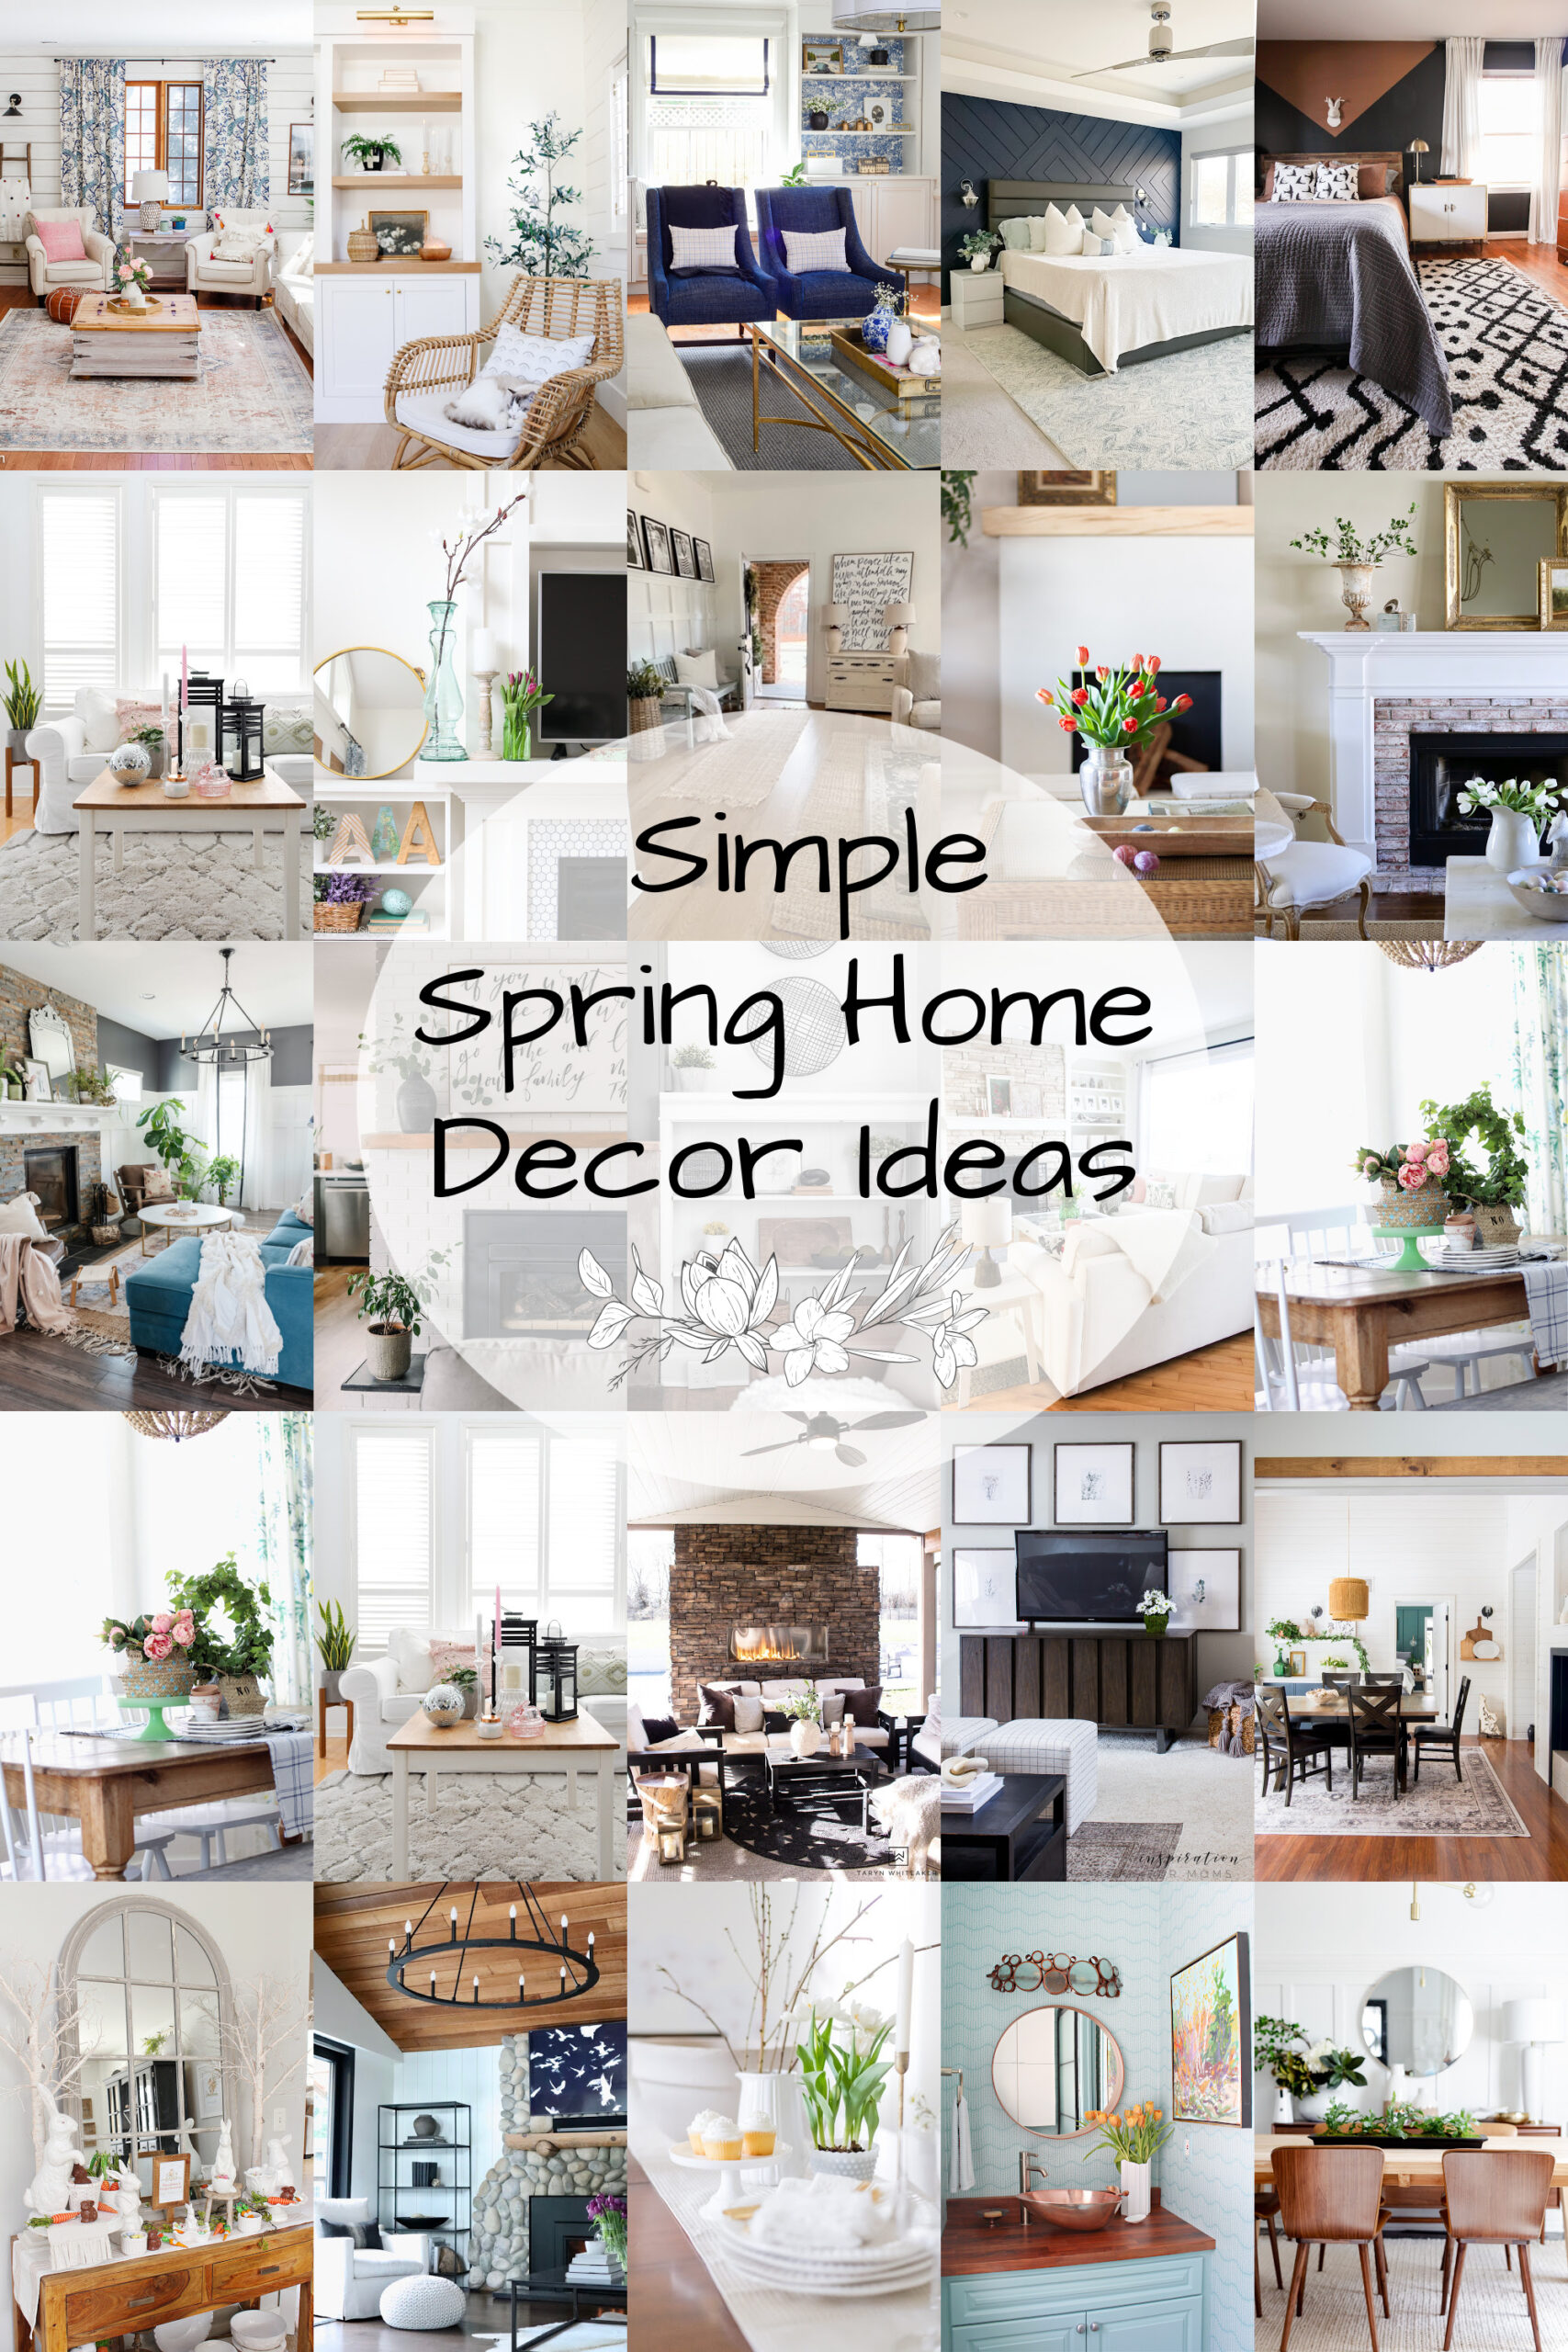 Simple Spring Home Decor Ideas poster.